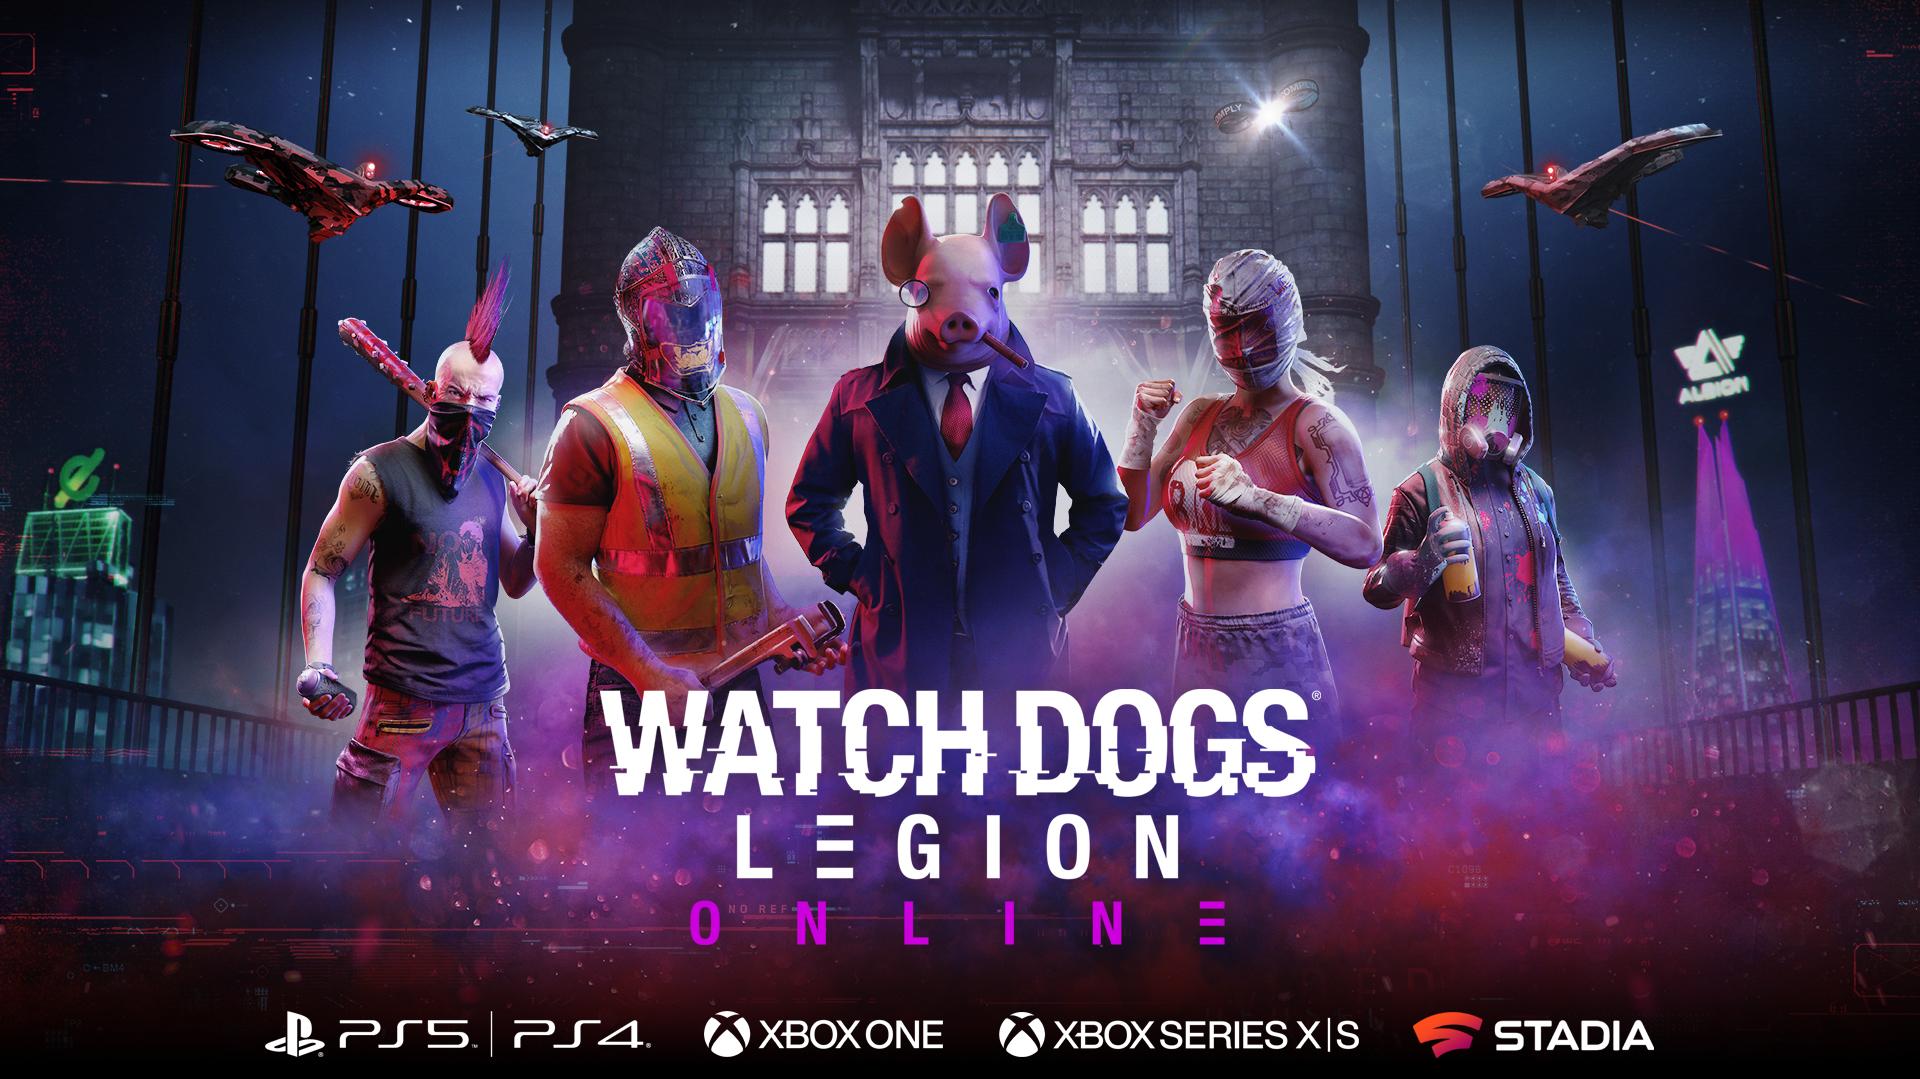 Watch Dogs Legion on X Our Online Mode is now live on PS4 PS5